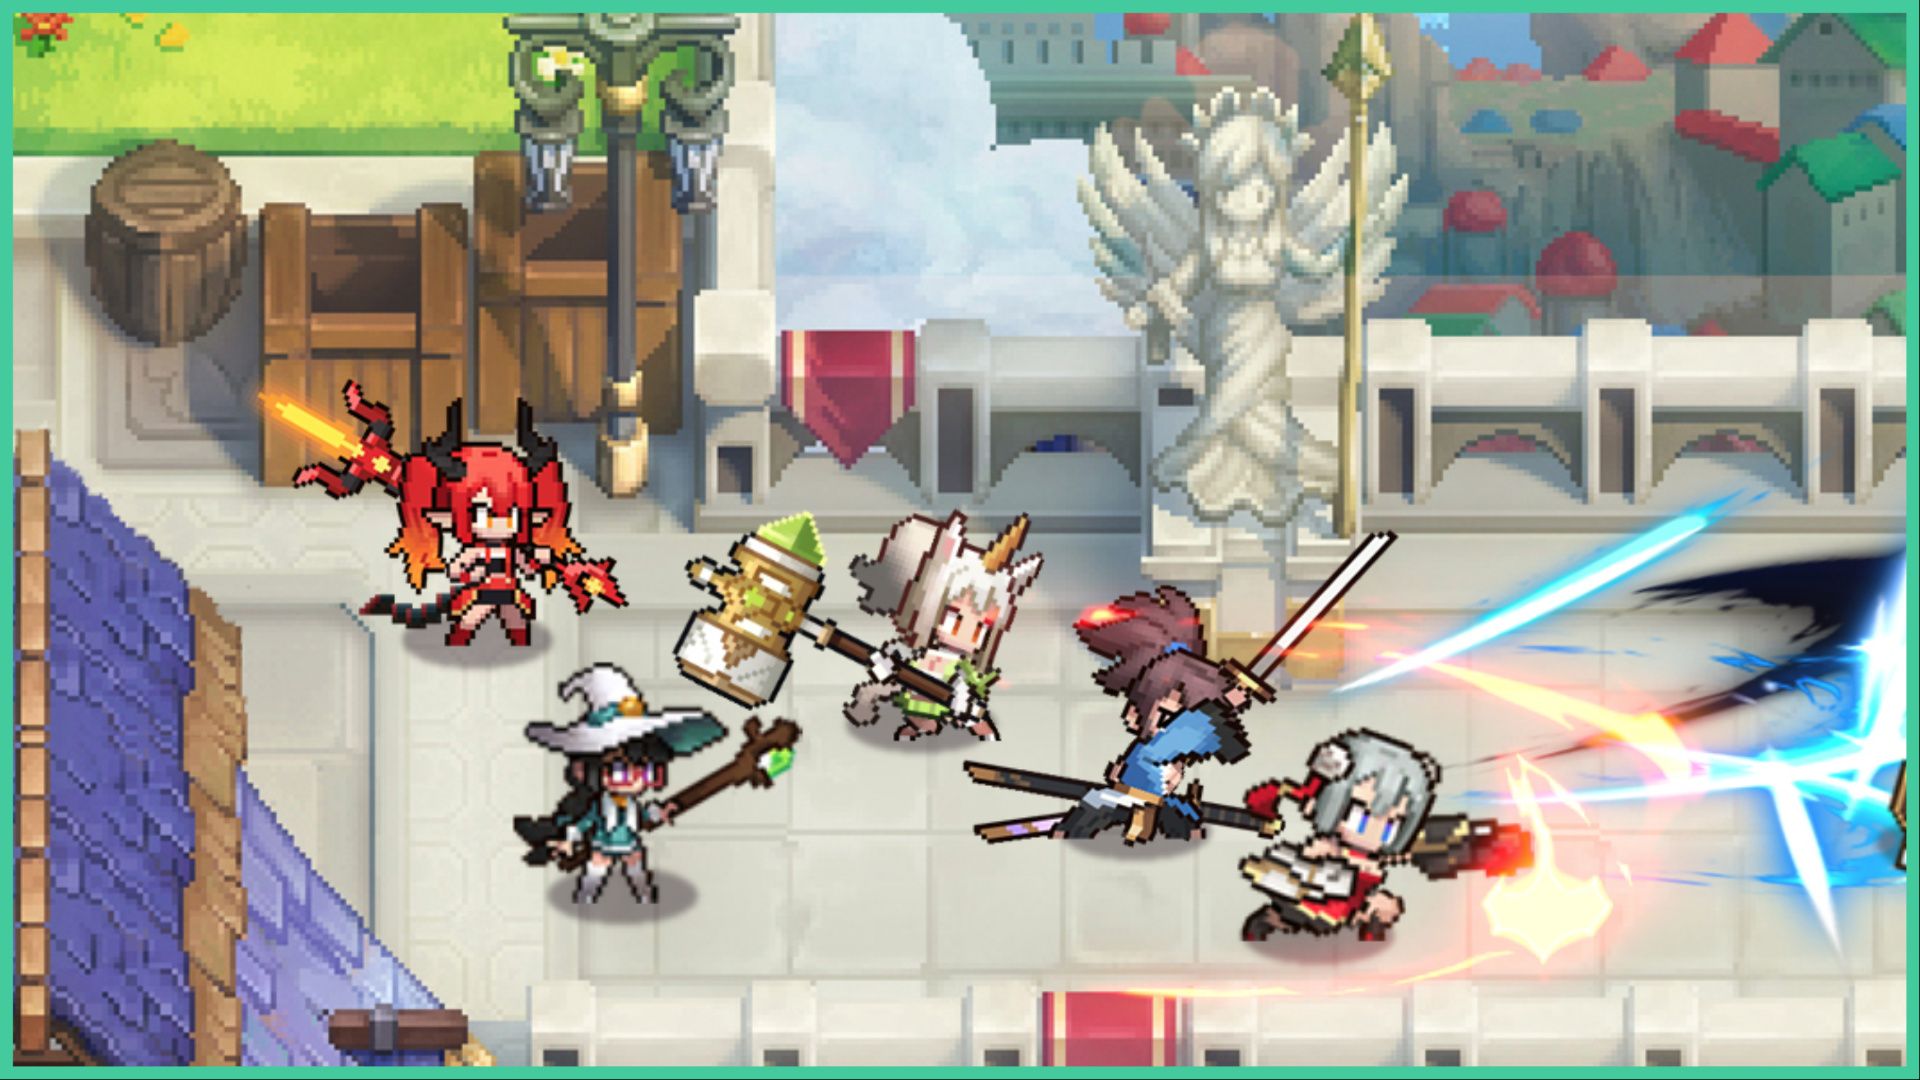 feature image for our pixel heroes codes guide, the image features a promo screenshot of the game with 5 pixel sprites holding various weapons like a large hammer, a wooden staff, and swords, battling against enemies on a stone bridge above the city with a stone statue of an angel holding a spear